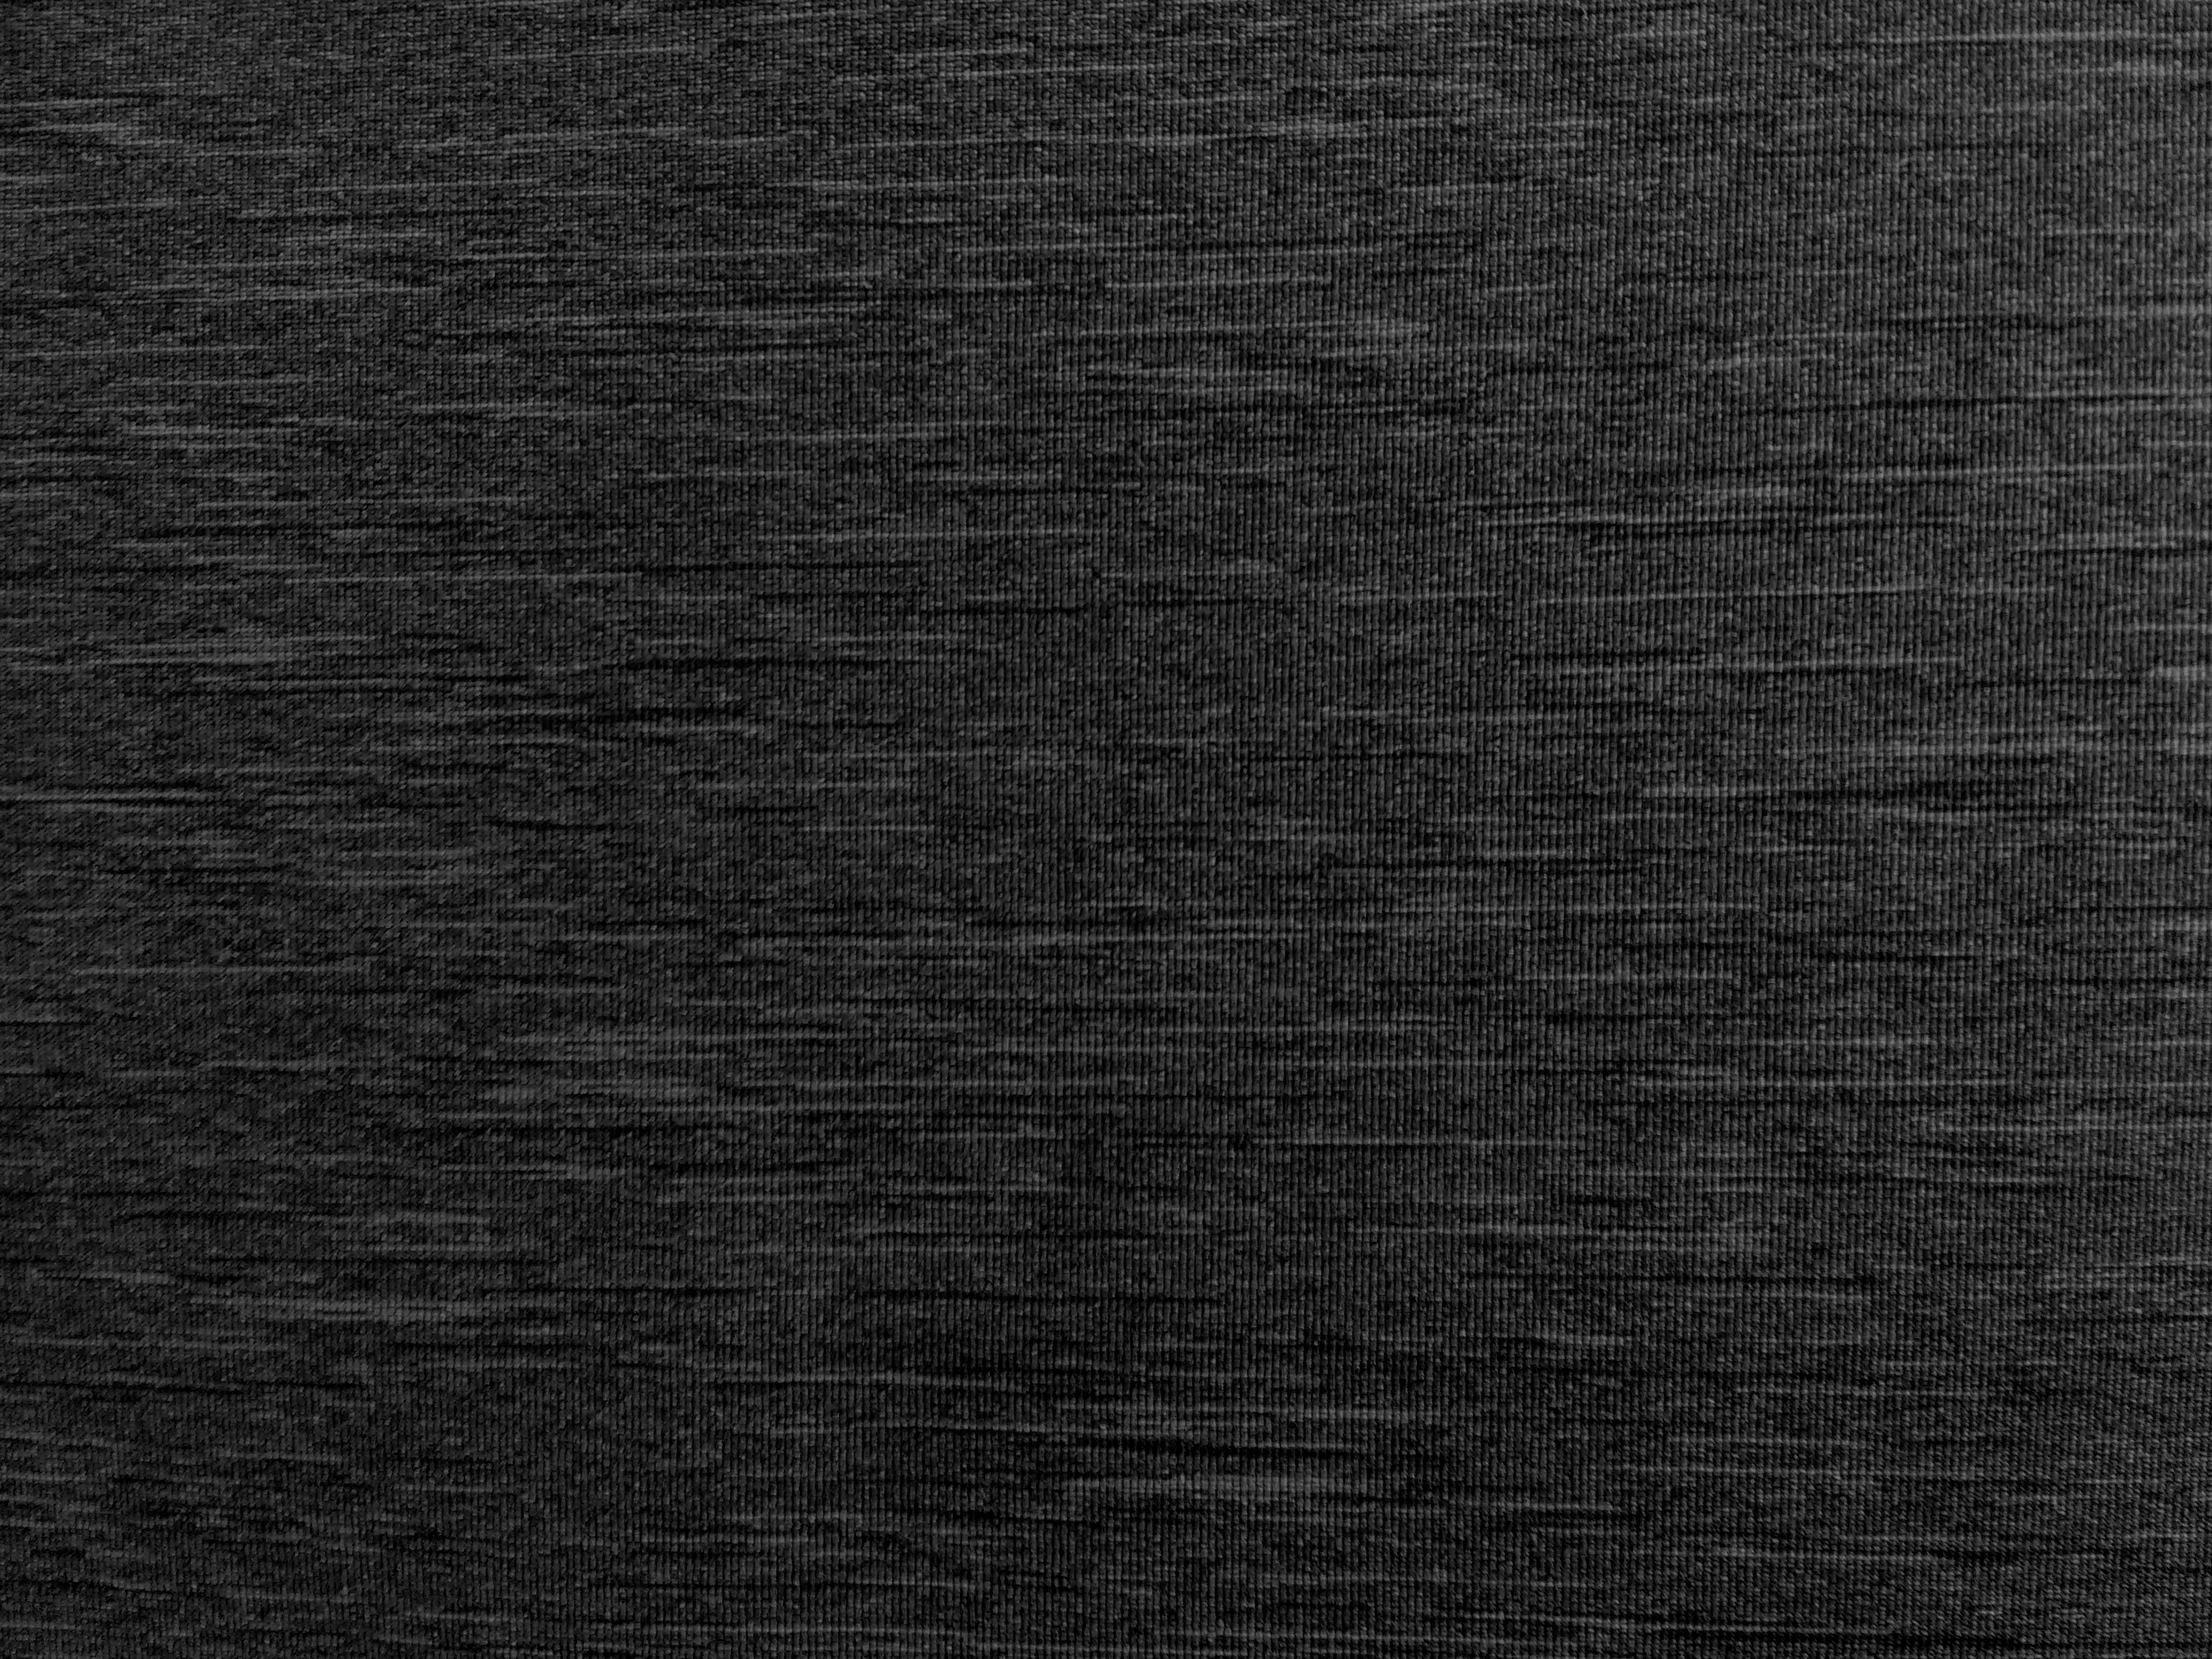 Black Variegated Knit Fabric Texture Picture | Free Photograph | Photos